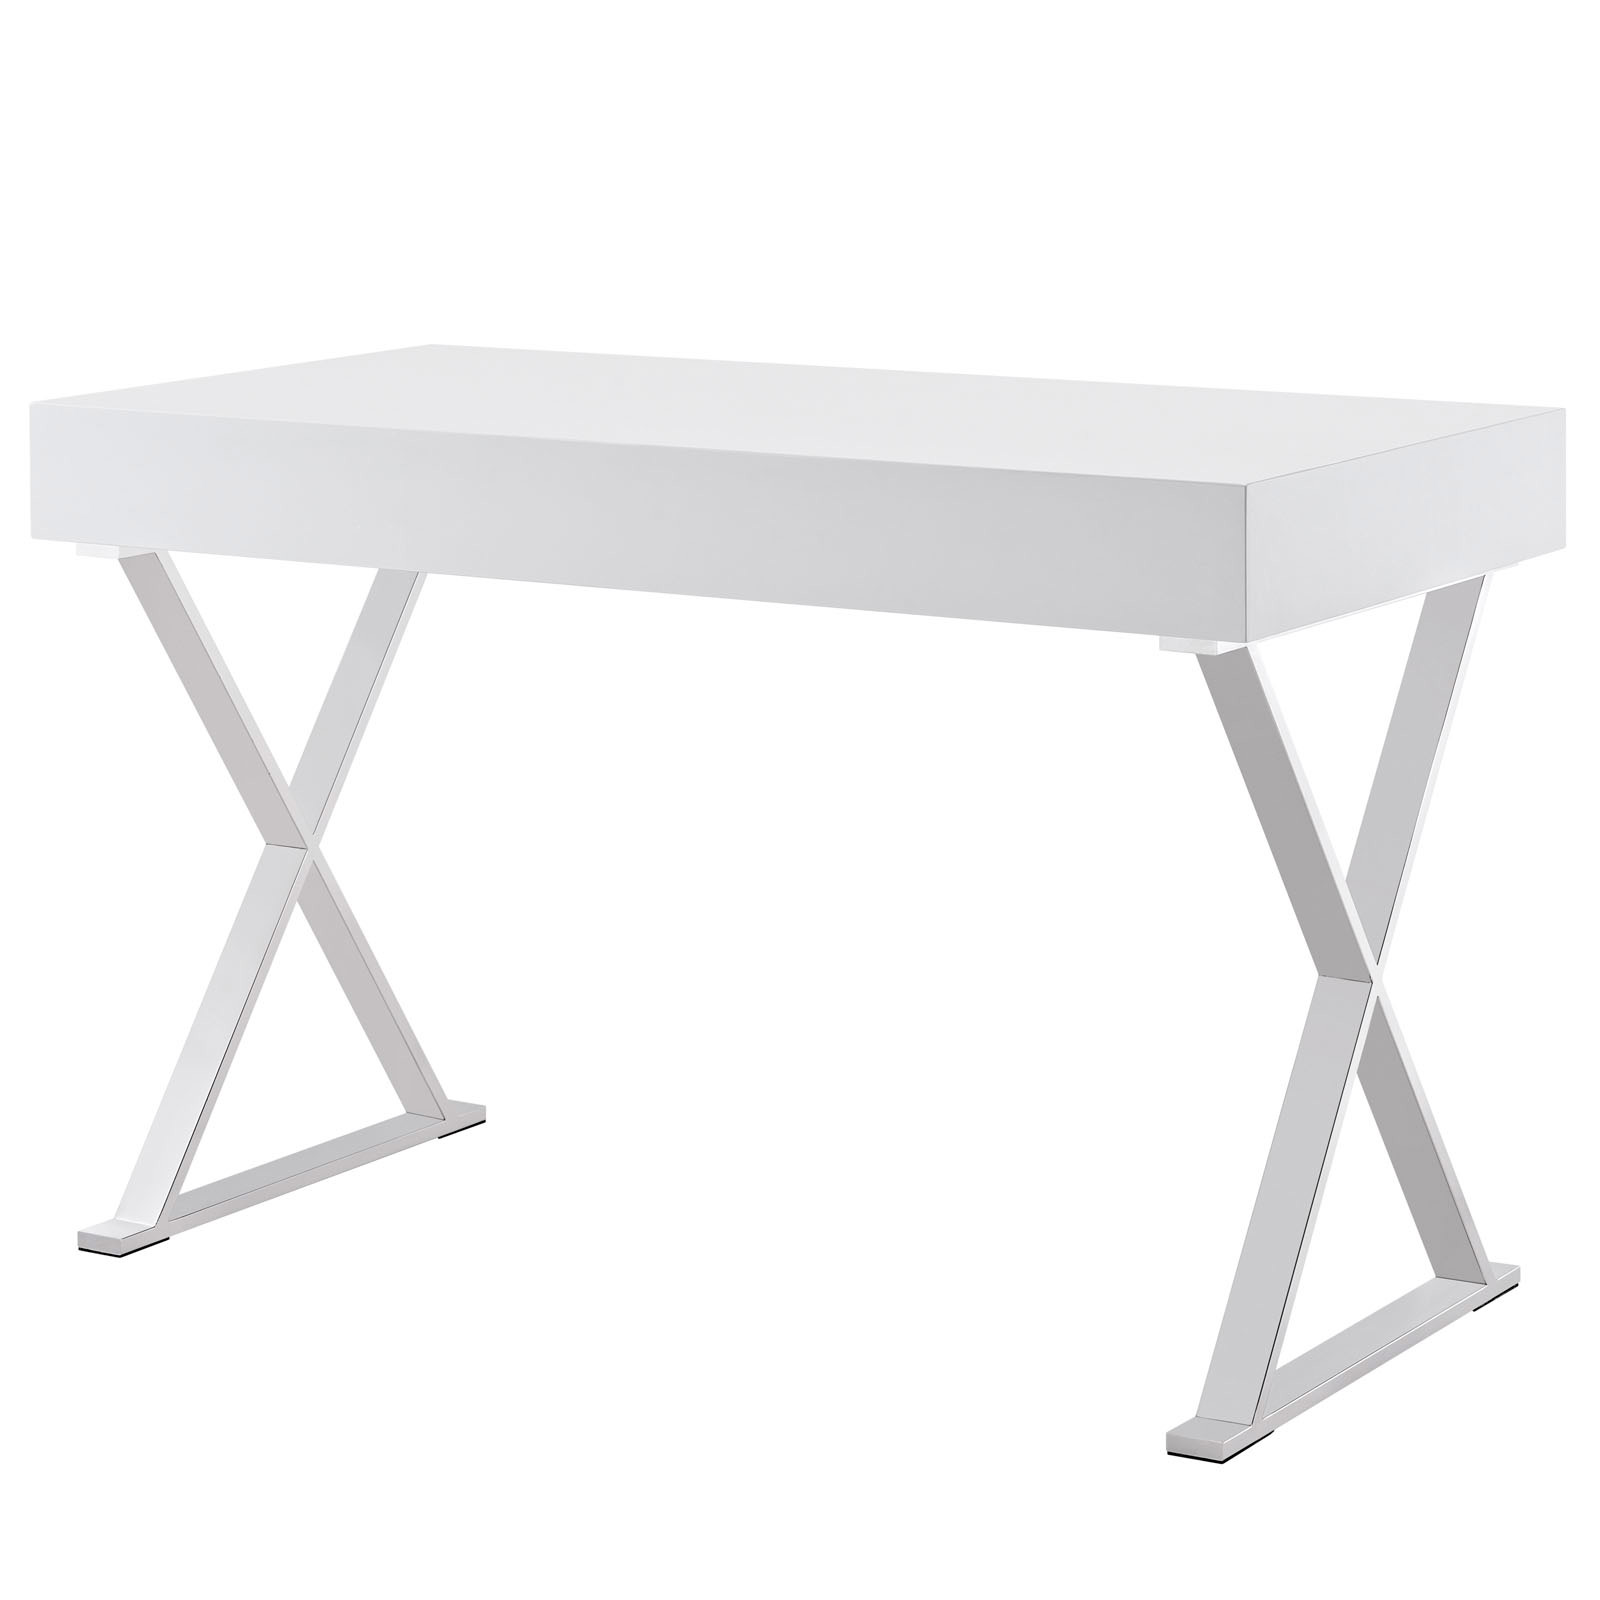 Space saving desk from Modway - Back View - Shown in White